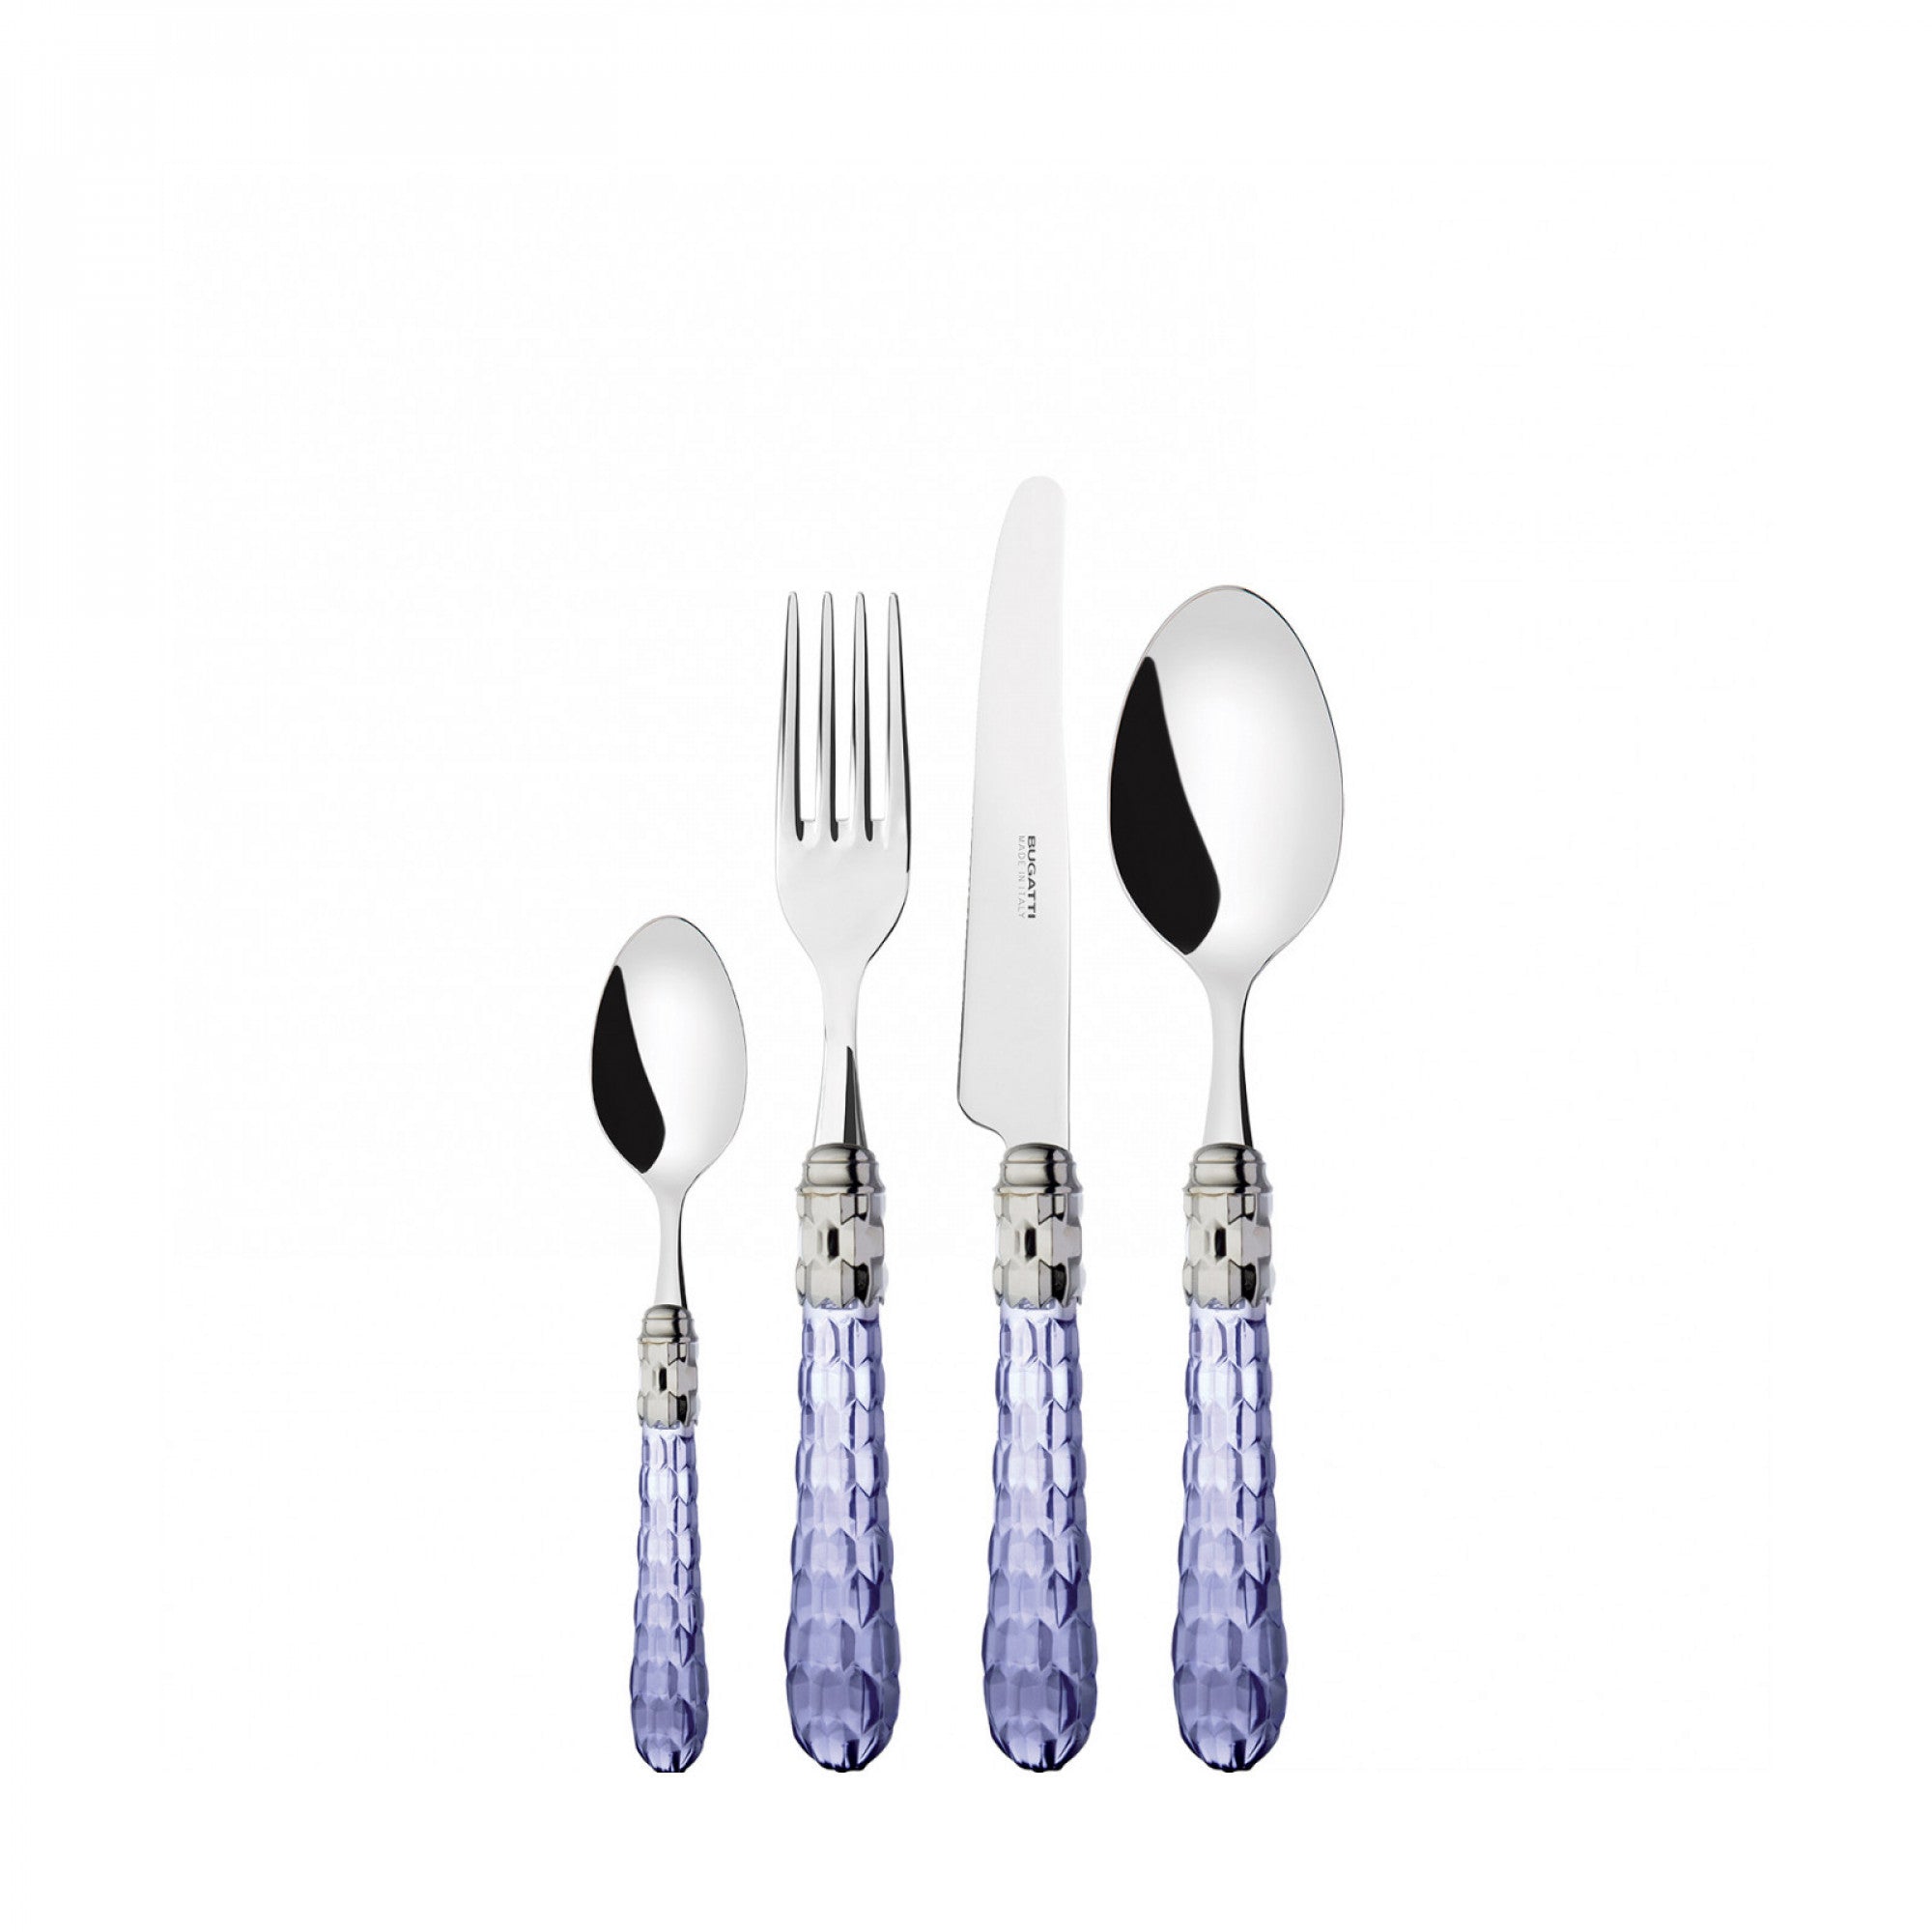 BUGATTI, Cristallo, 24-piece cutlery set in 18/10 stainless steel, chromed ring. Packed in Gallery box